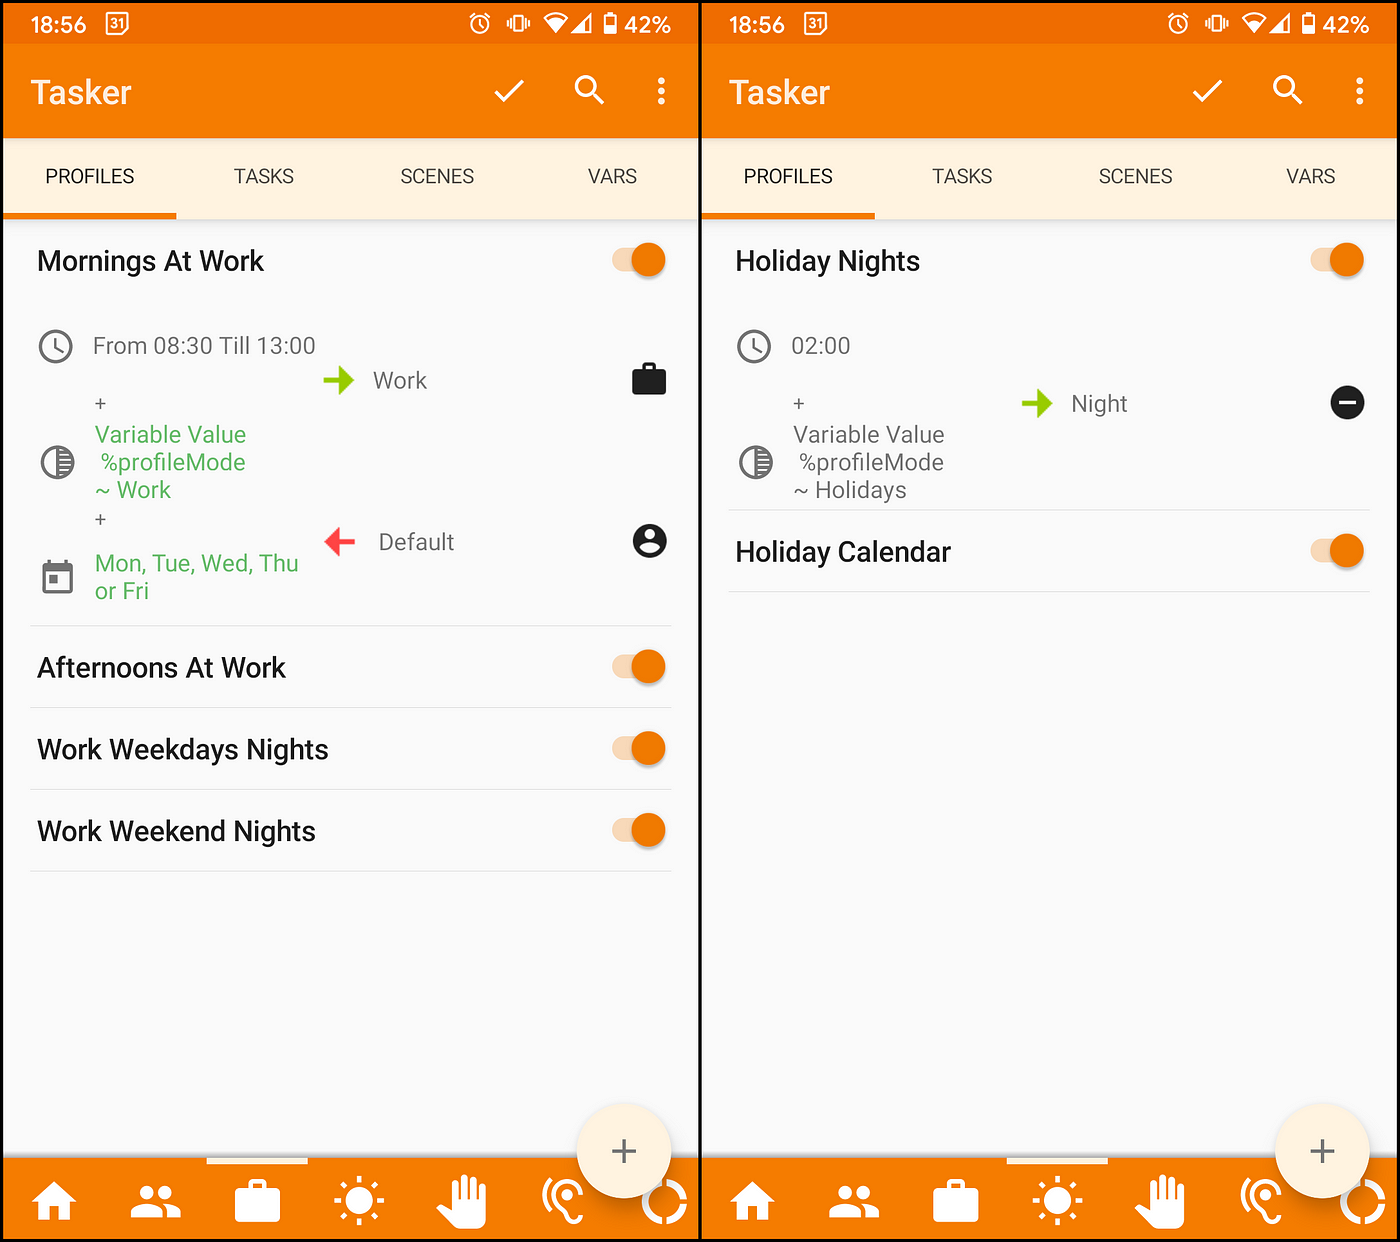 Completely automate Android device with Tasker | by Alberto Piras | Geek Culture |